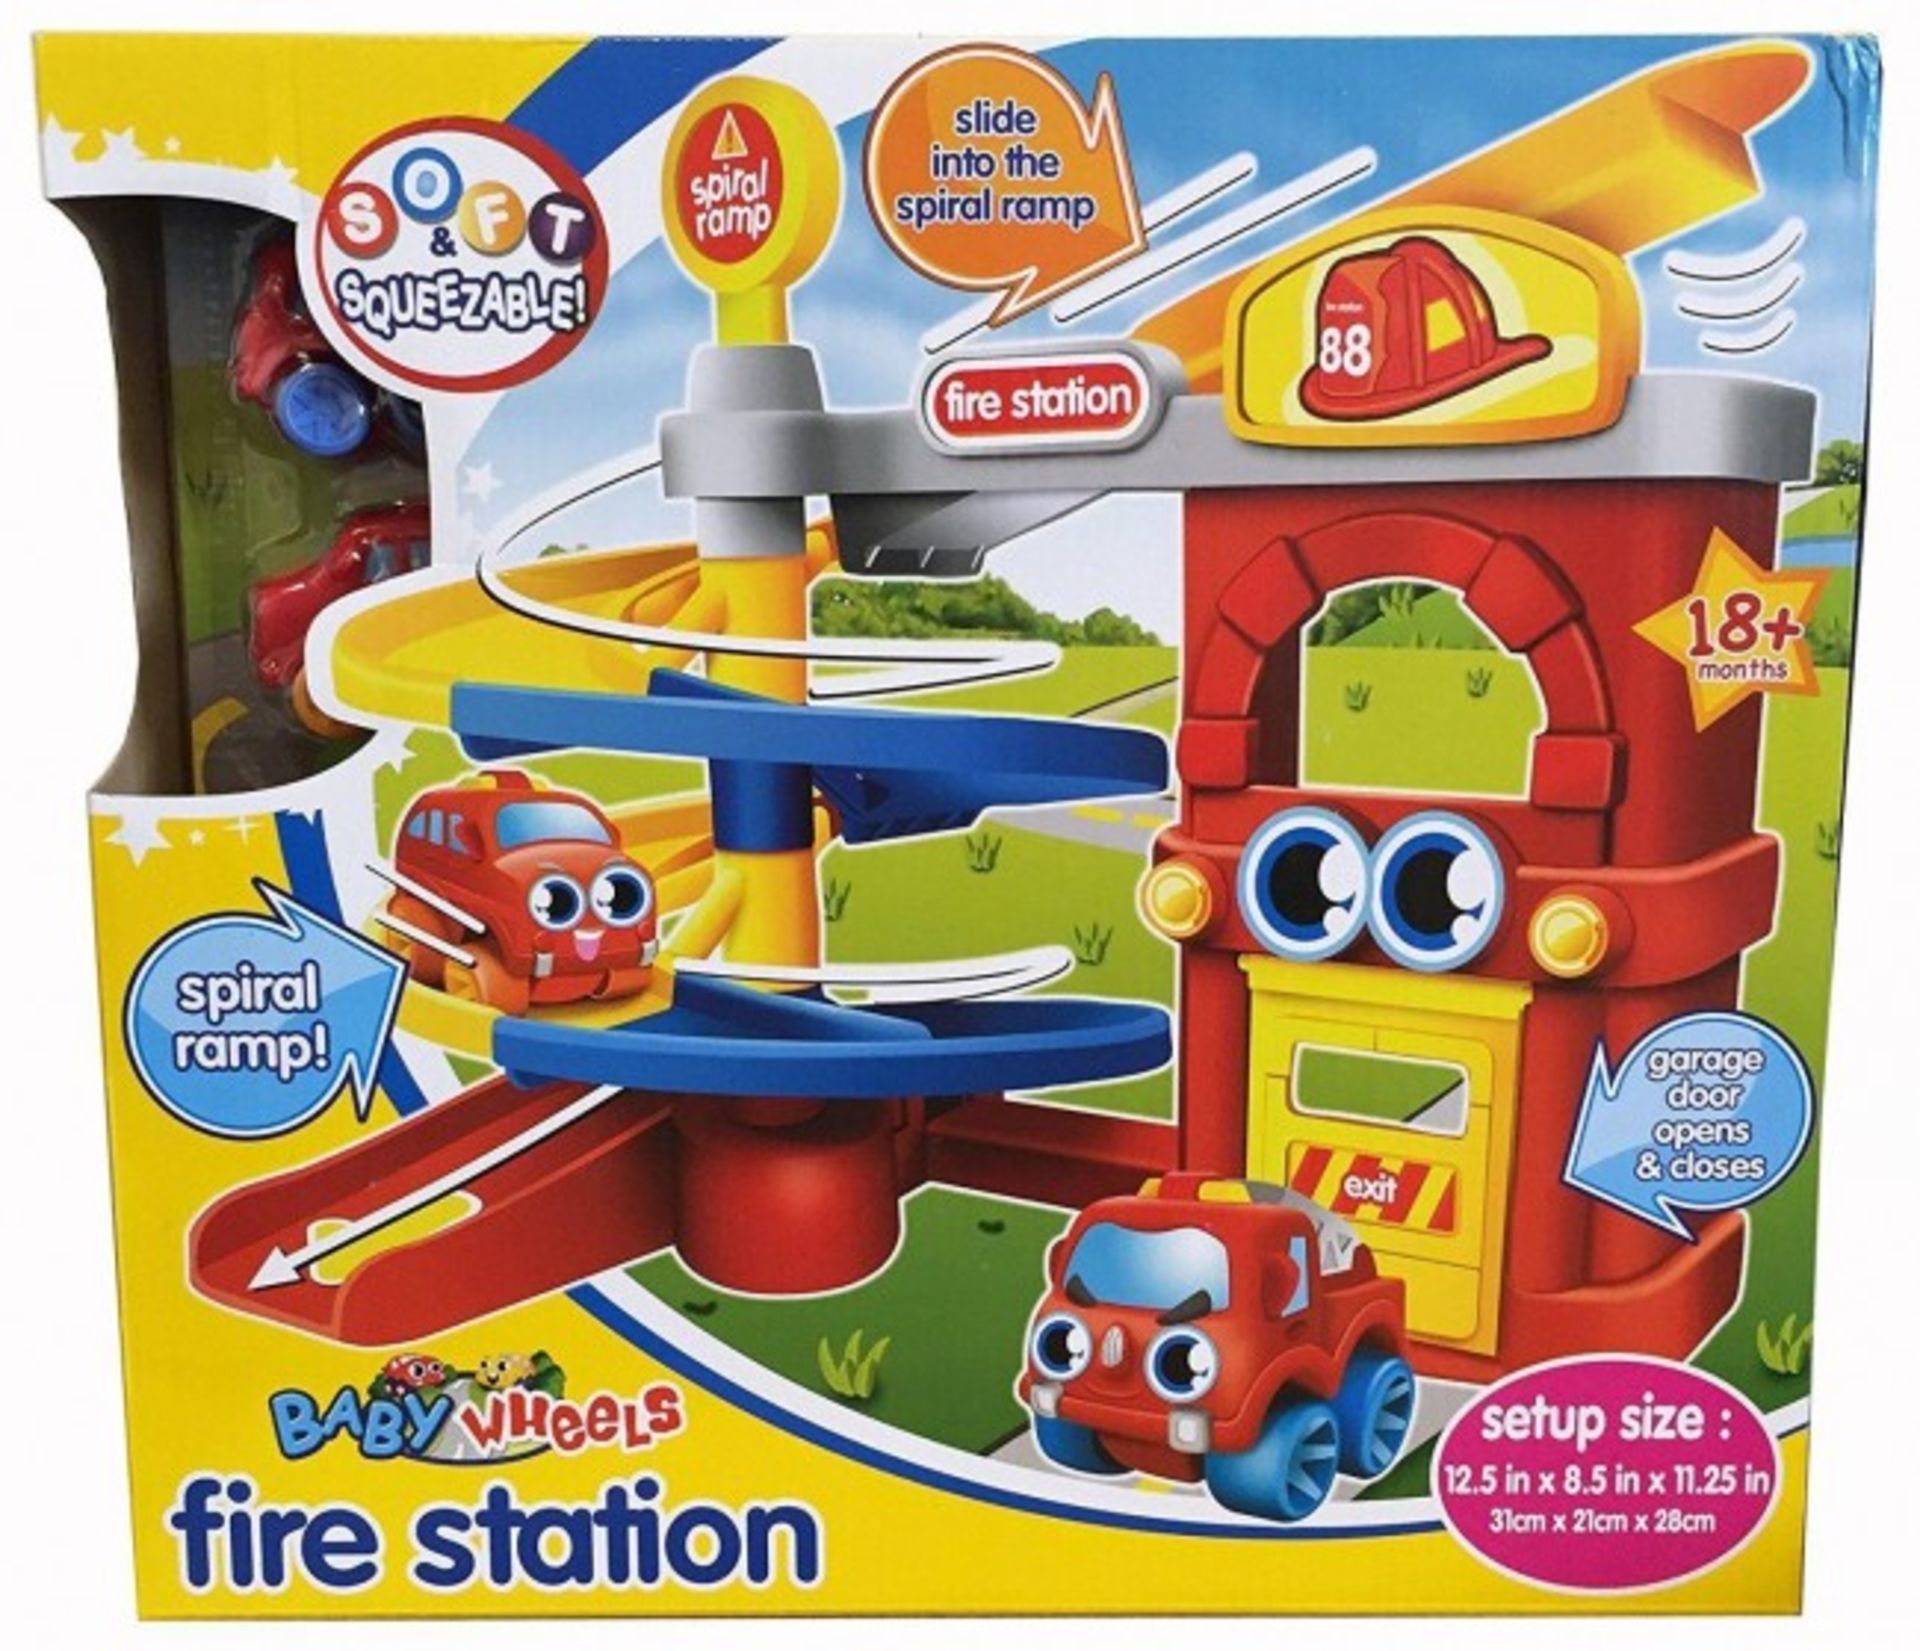 V *TRADE QTY* Brand New Baby Wheels Fire Station Play Set 8mths + ISP £12.99 (My Shop) X 80 YOUR BID